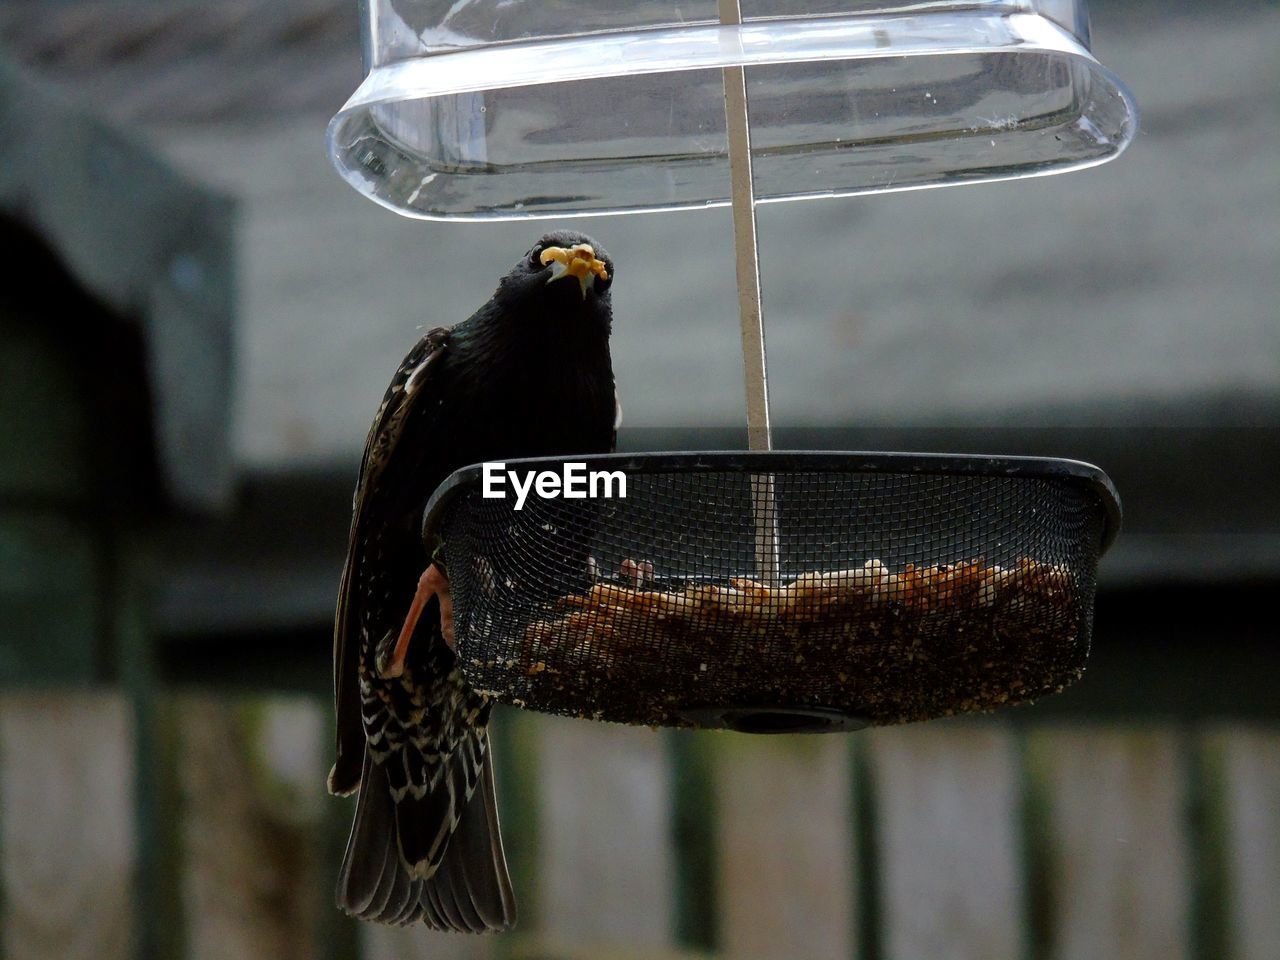 CLOSE-UP OF BIRD PERCHING ON FEEDER IN CONTAINER